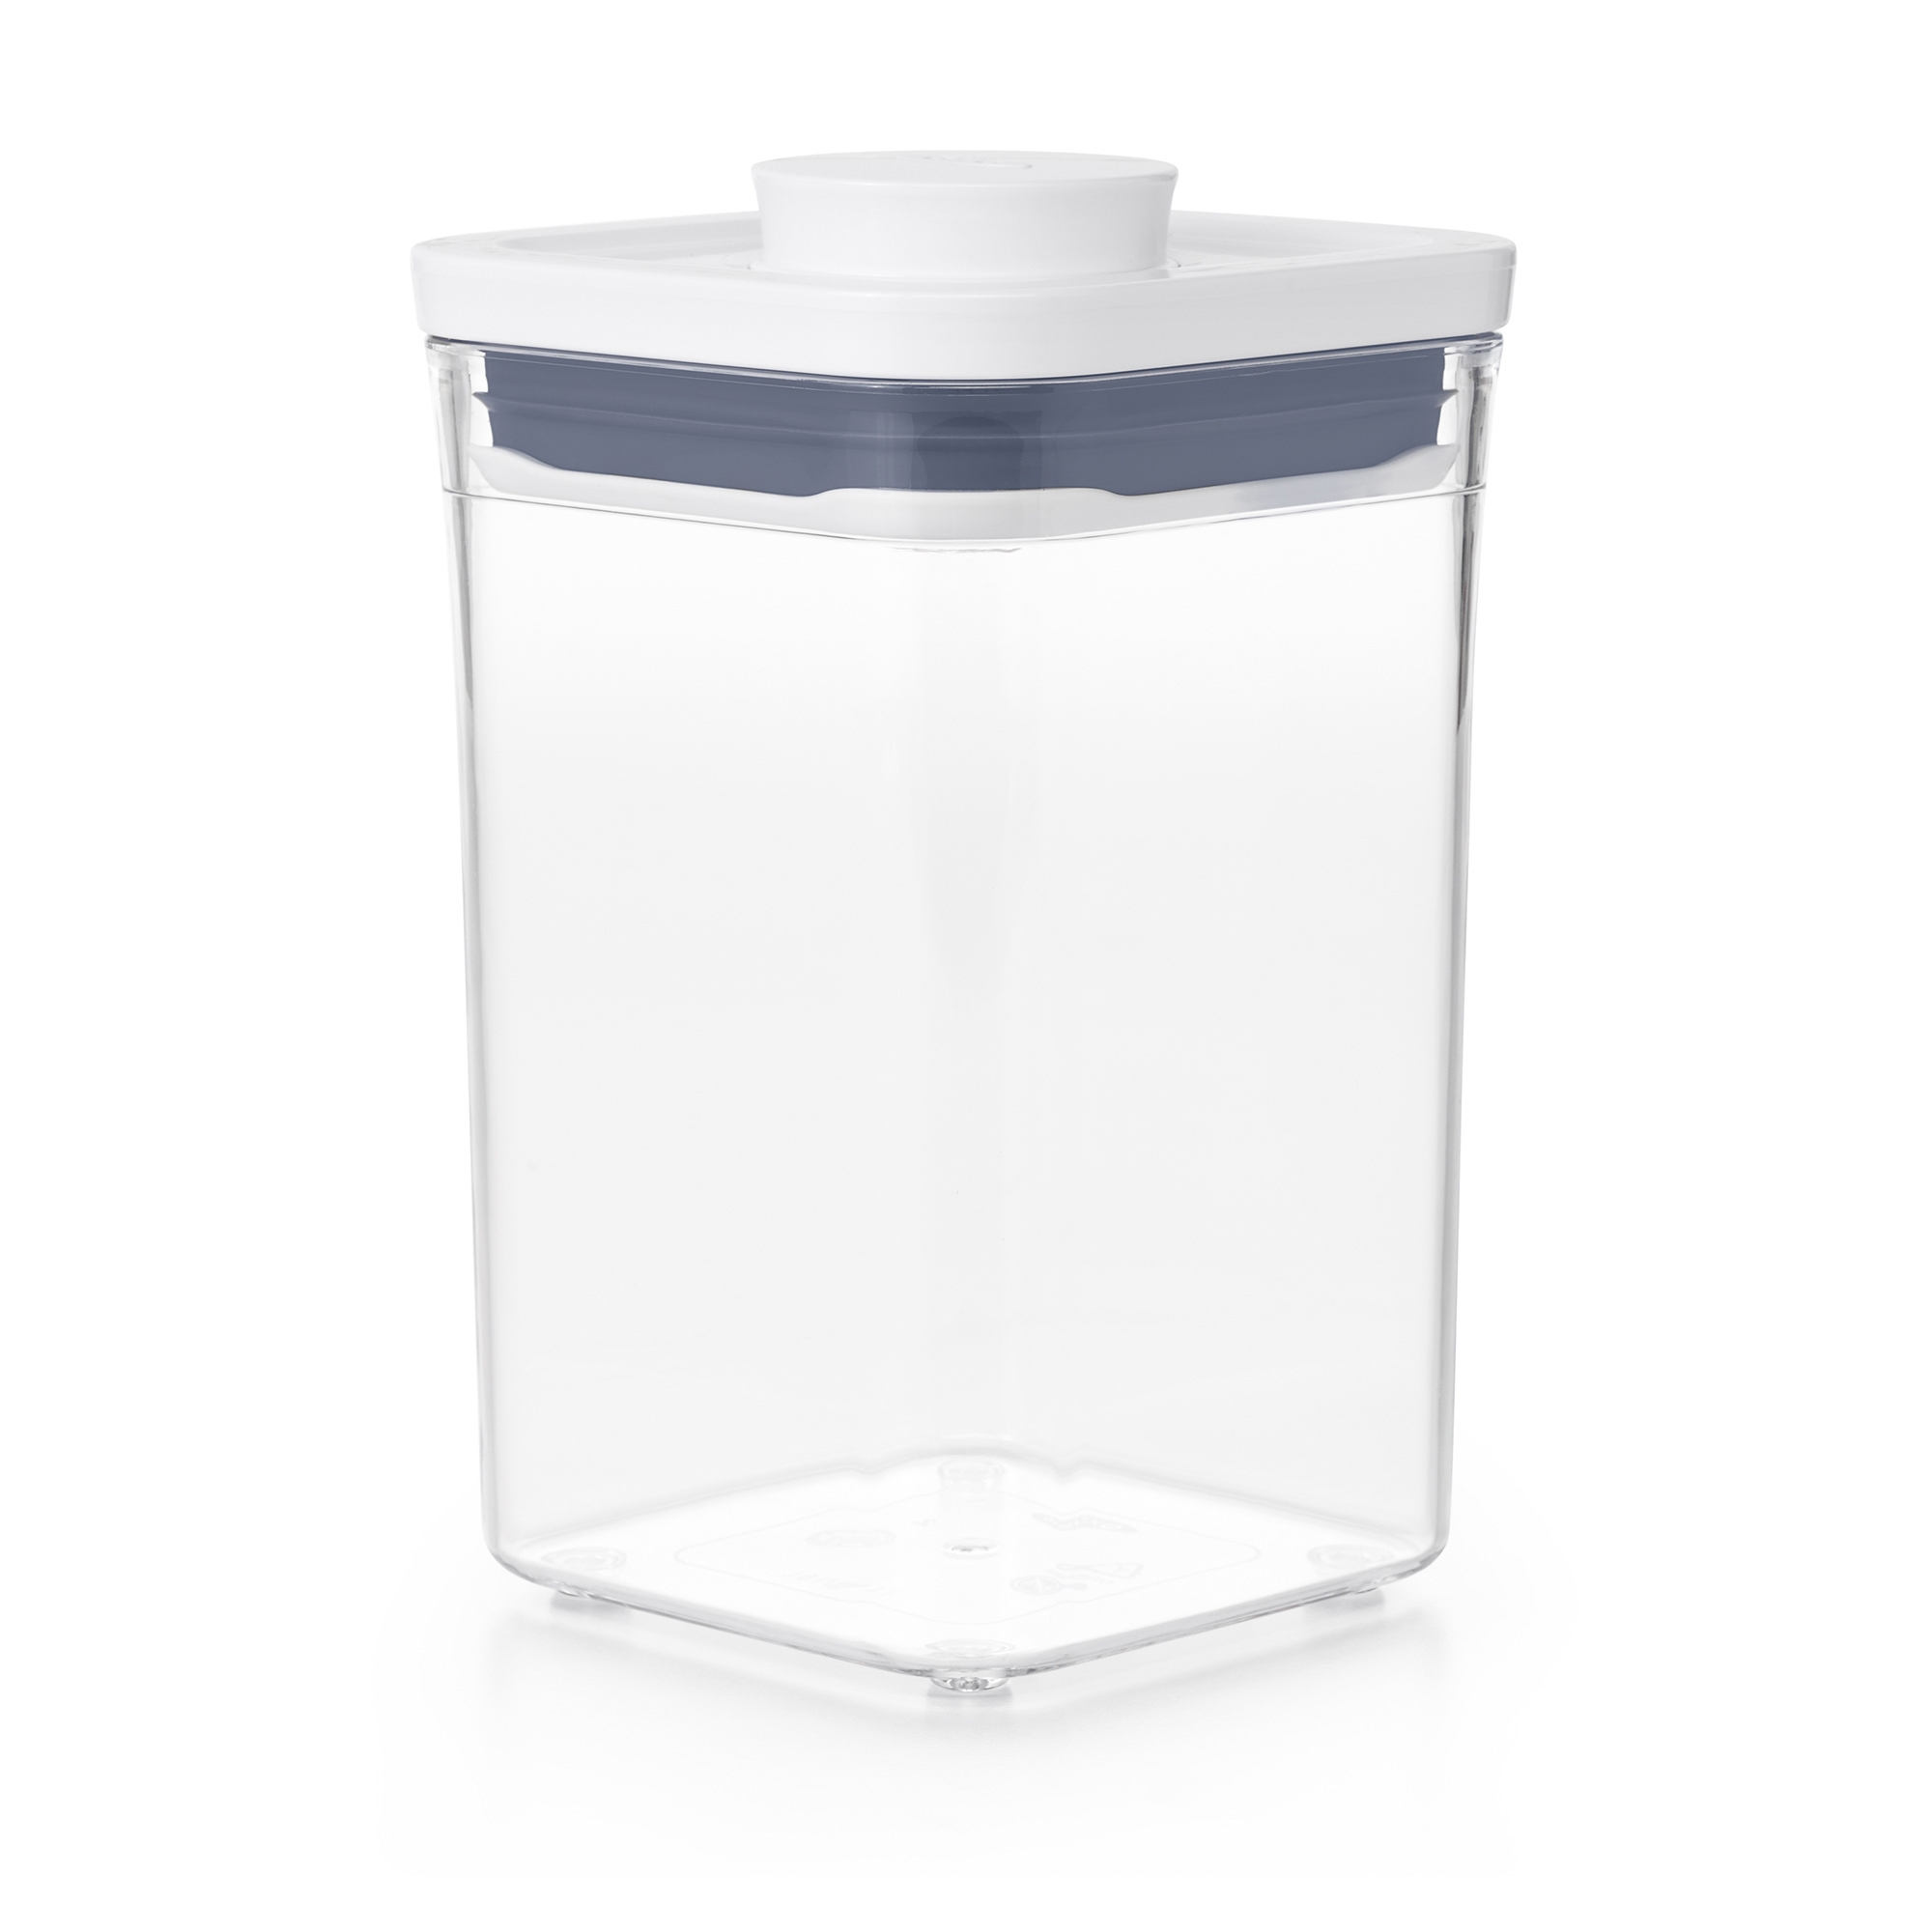 OXO Good Grips Square Pop 2.0 Container 1L Image 2